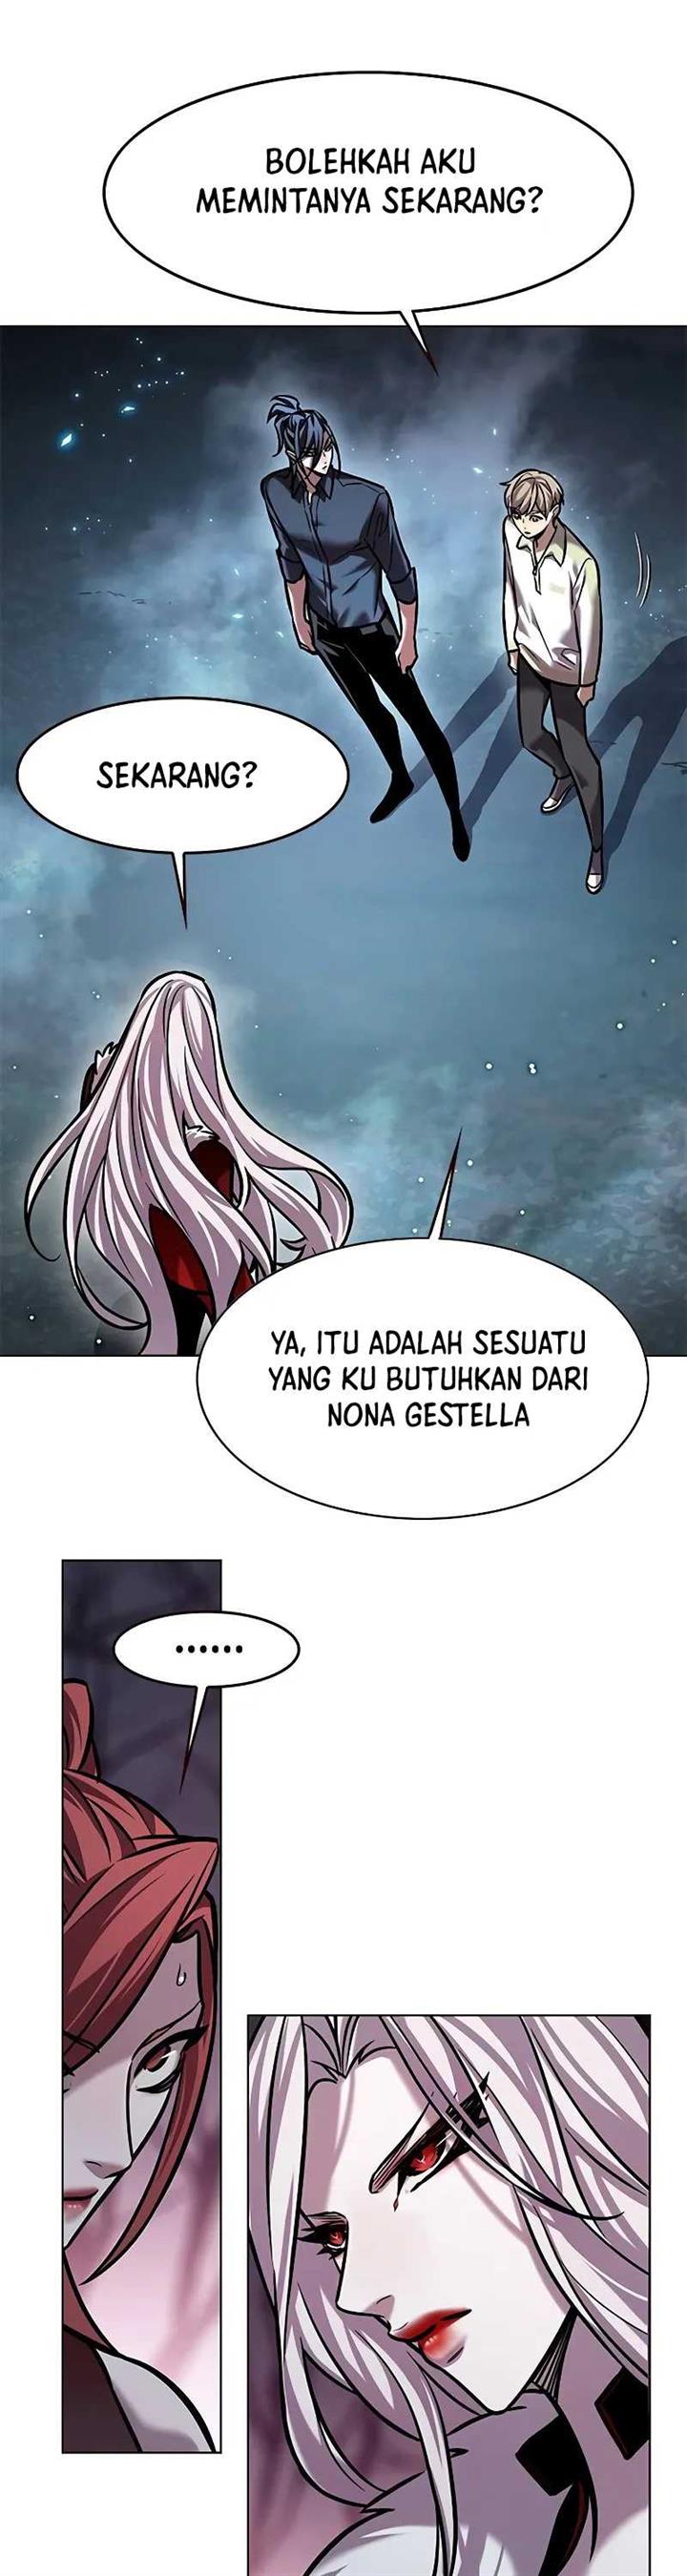 Eleceed Chapter 297